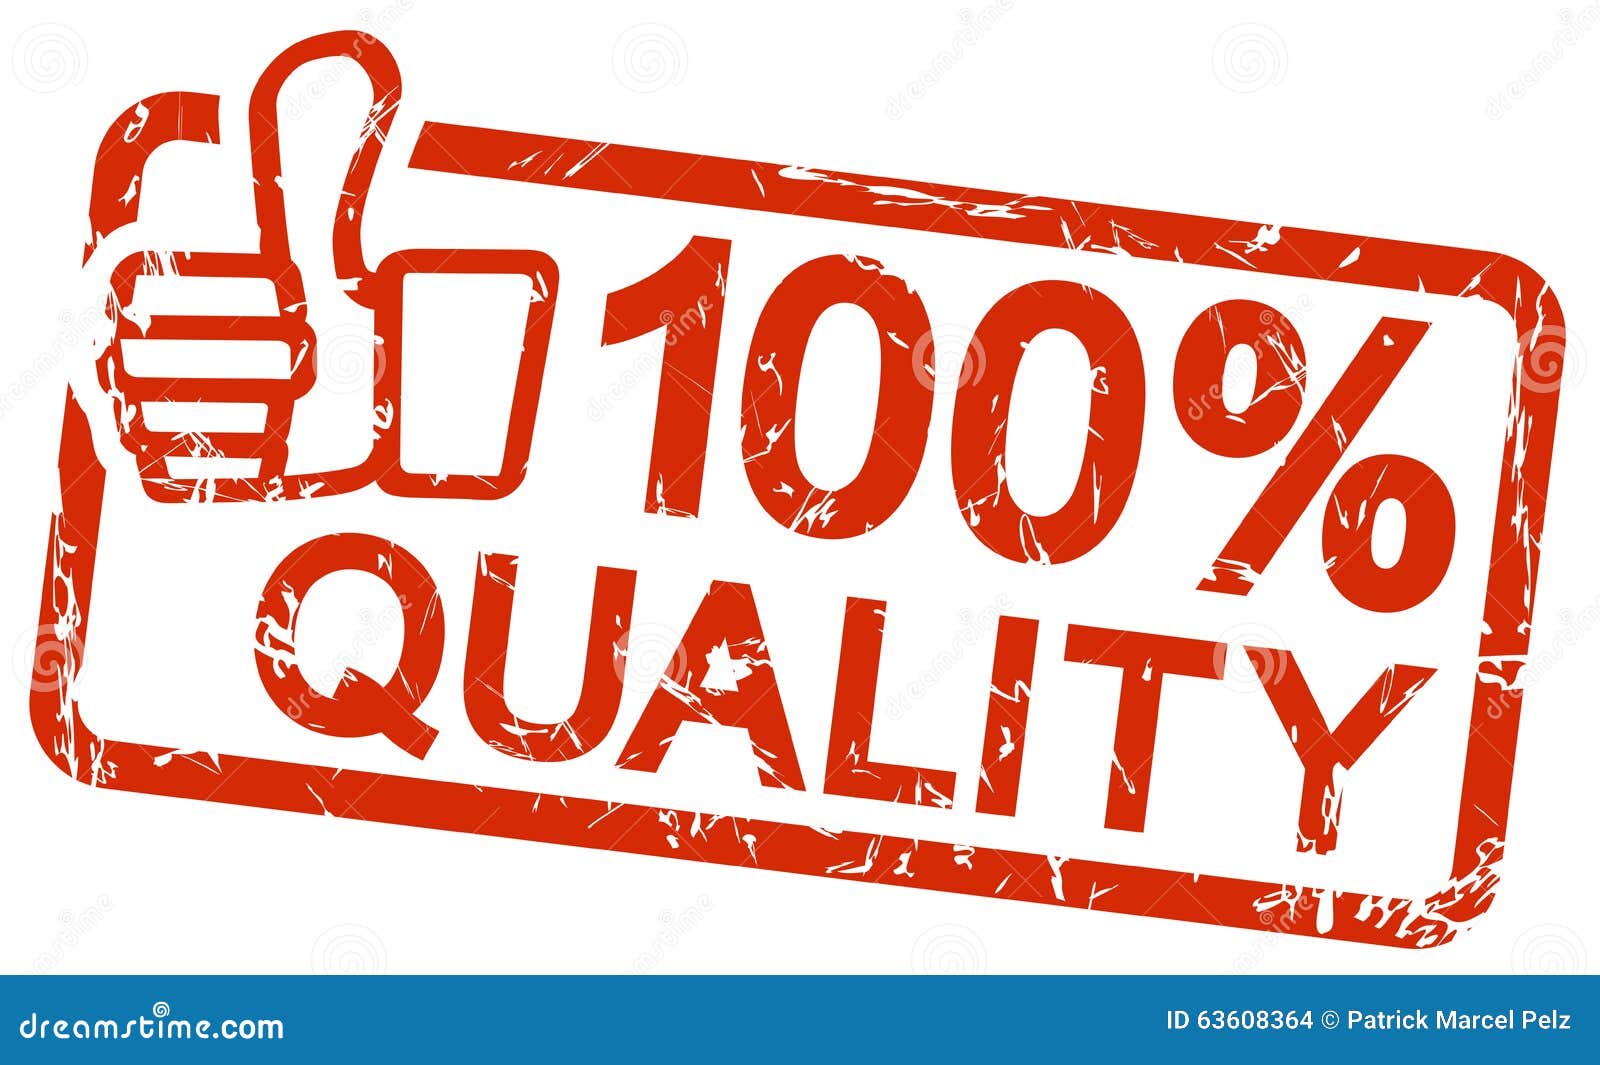 quality policy clipart - photo #25